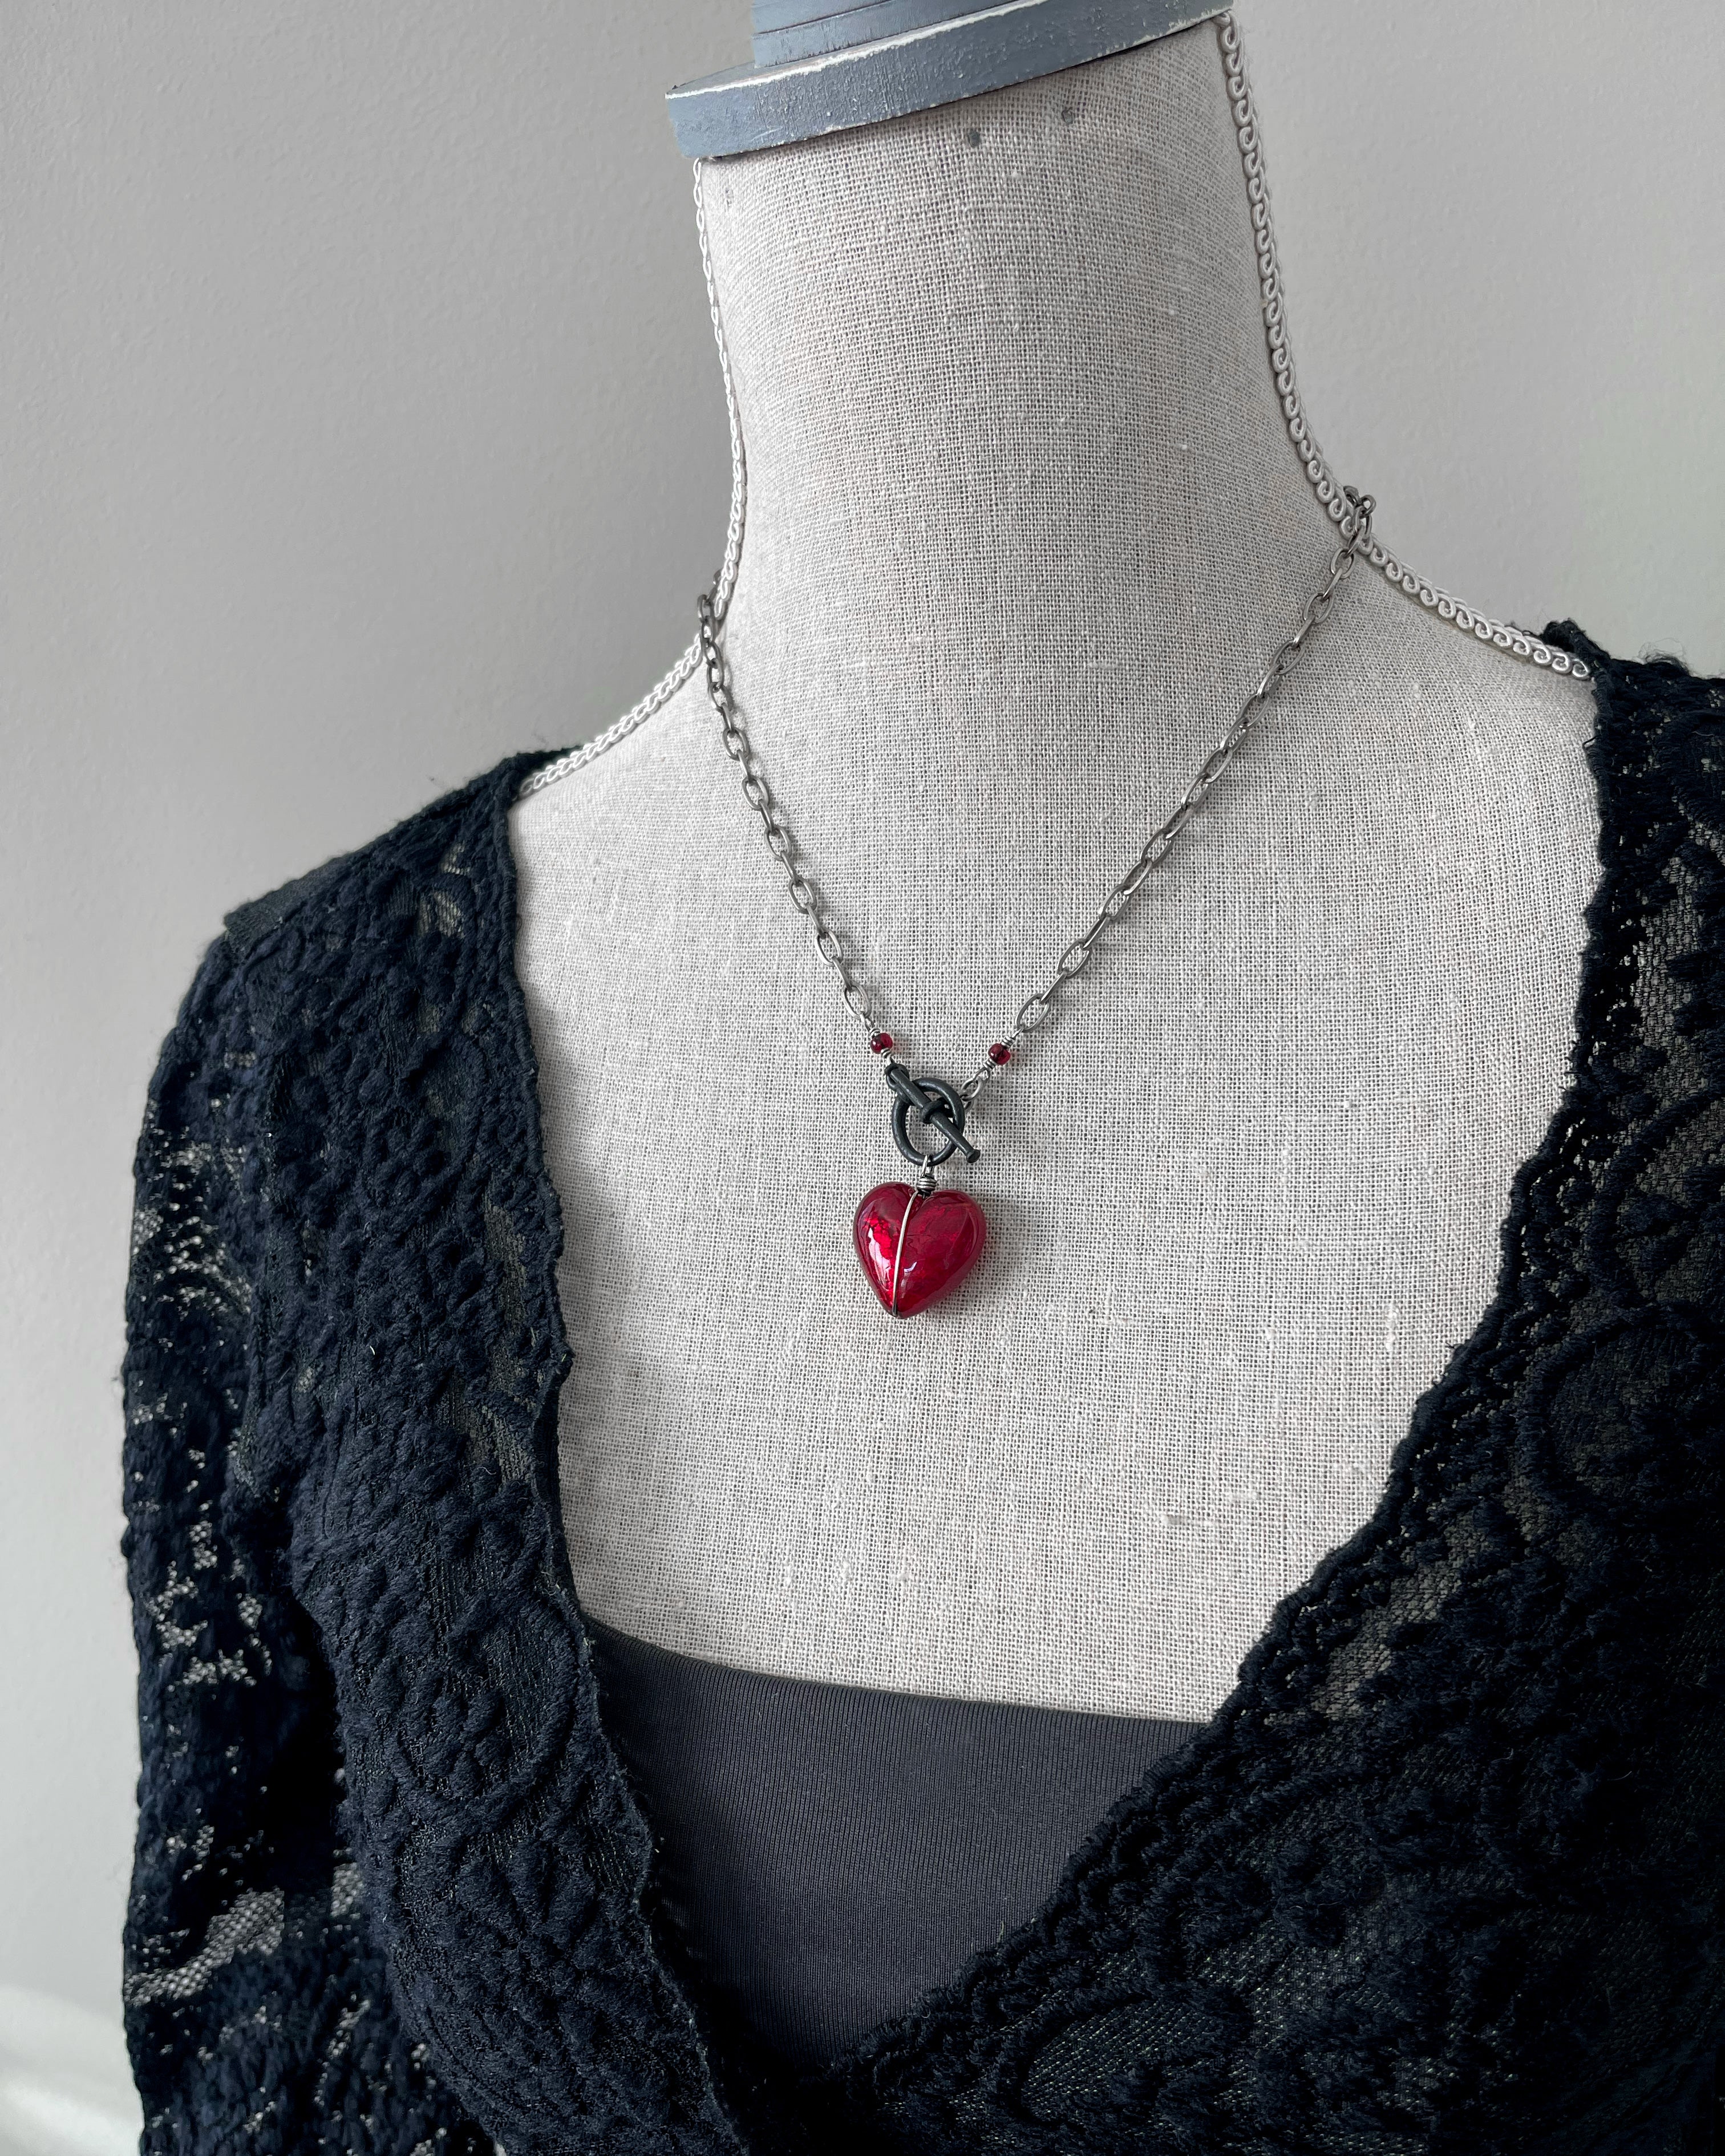 Ver 10. HEART of DARKNESS - Deep Red Heart Pendant Necklace